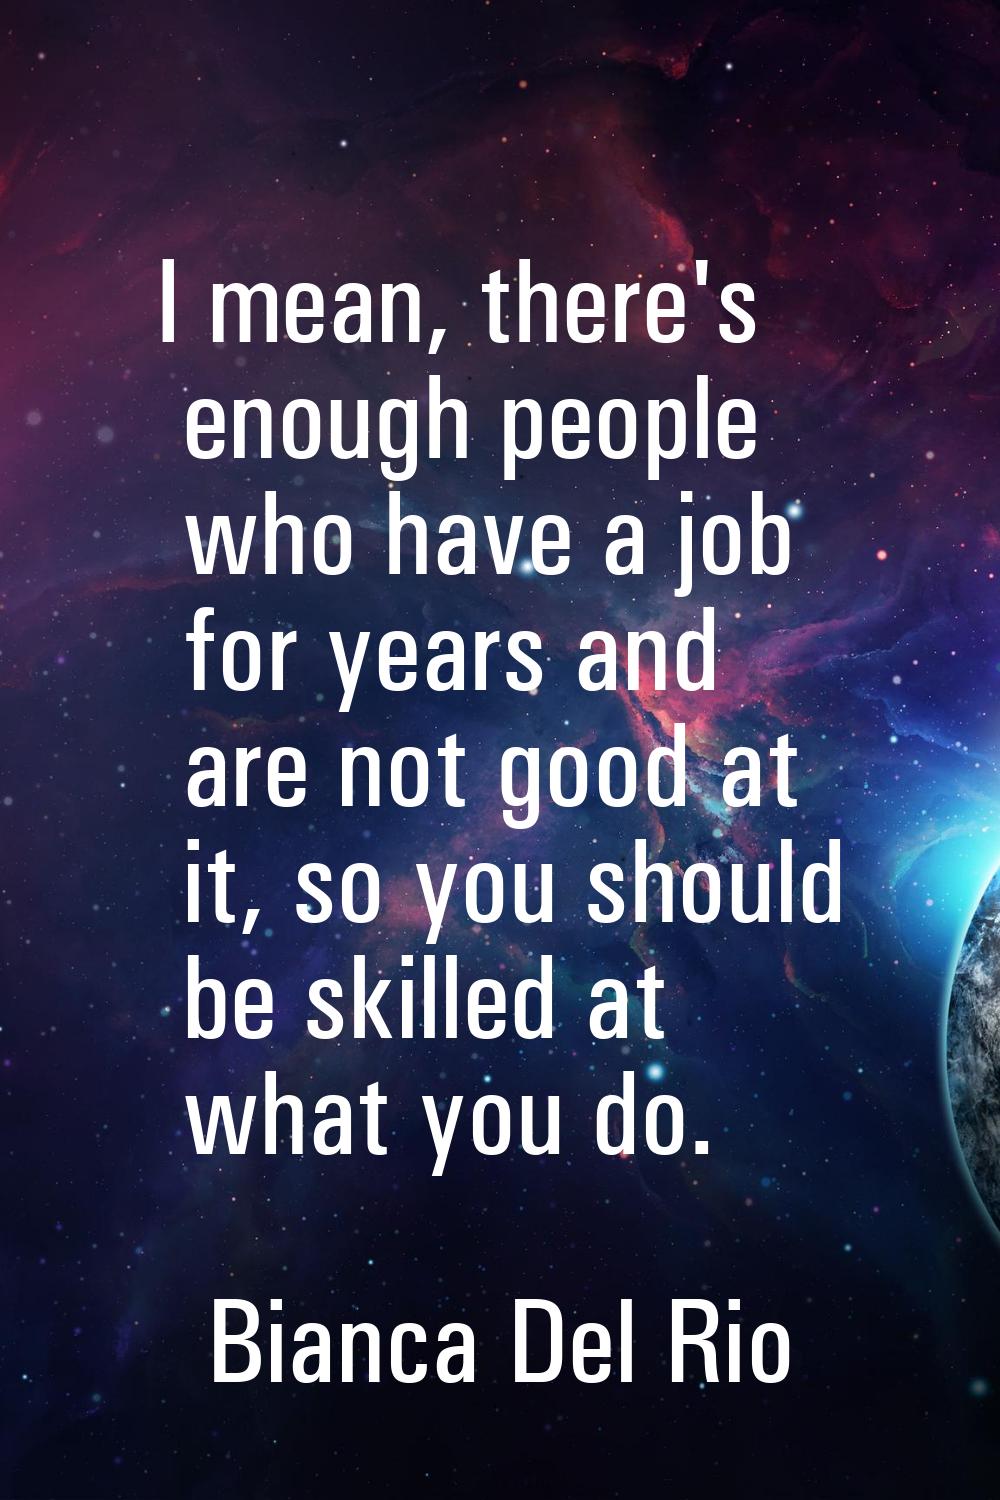 I mean, there's enough people who have a job for years and are not good at it, so you should be ski